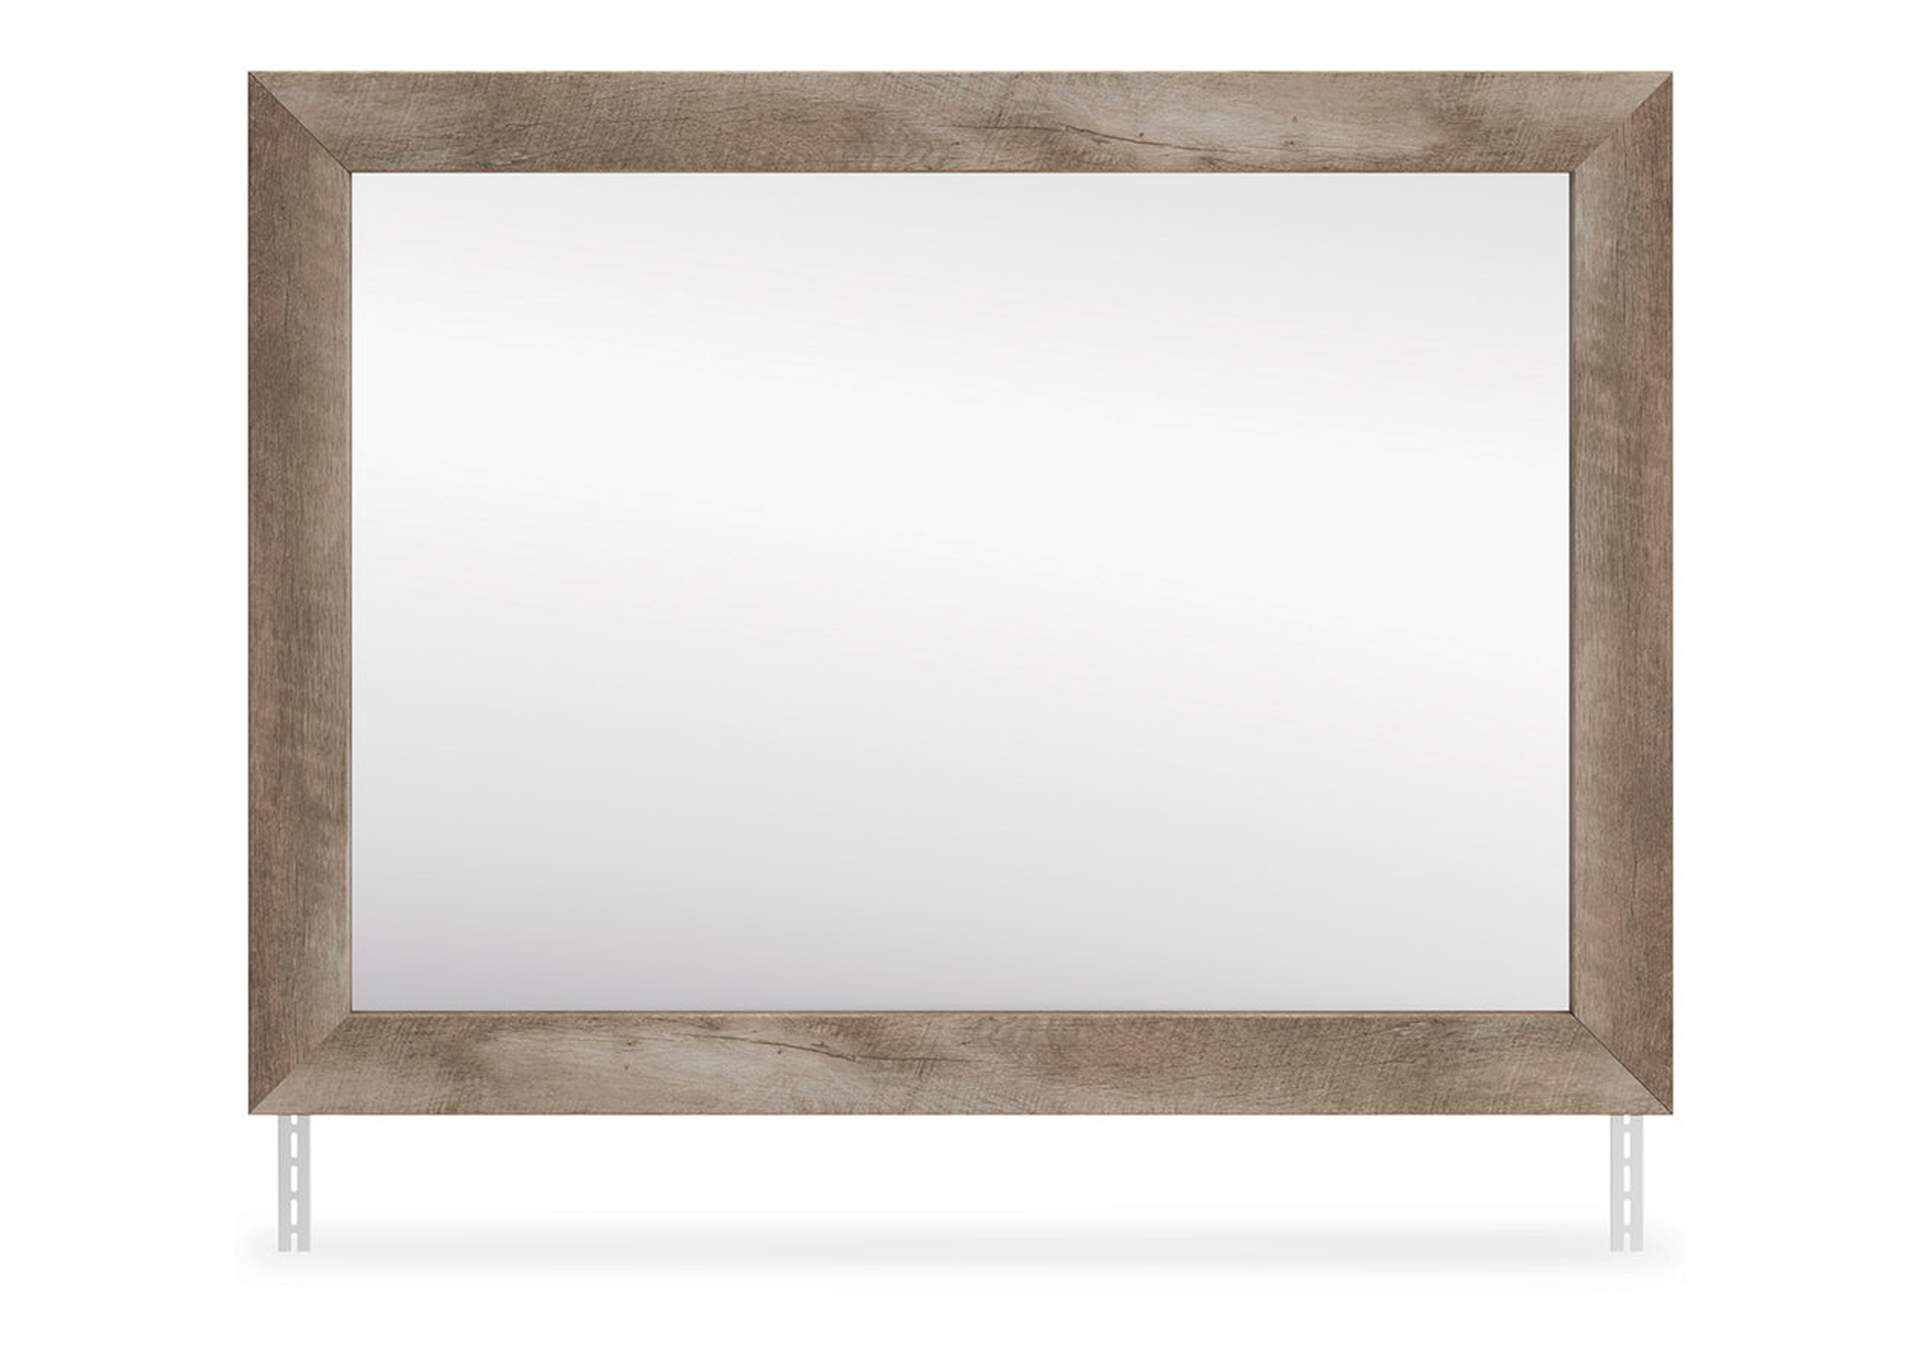 Yarbeck Bedroom Mirror,Signature Design By Ashley